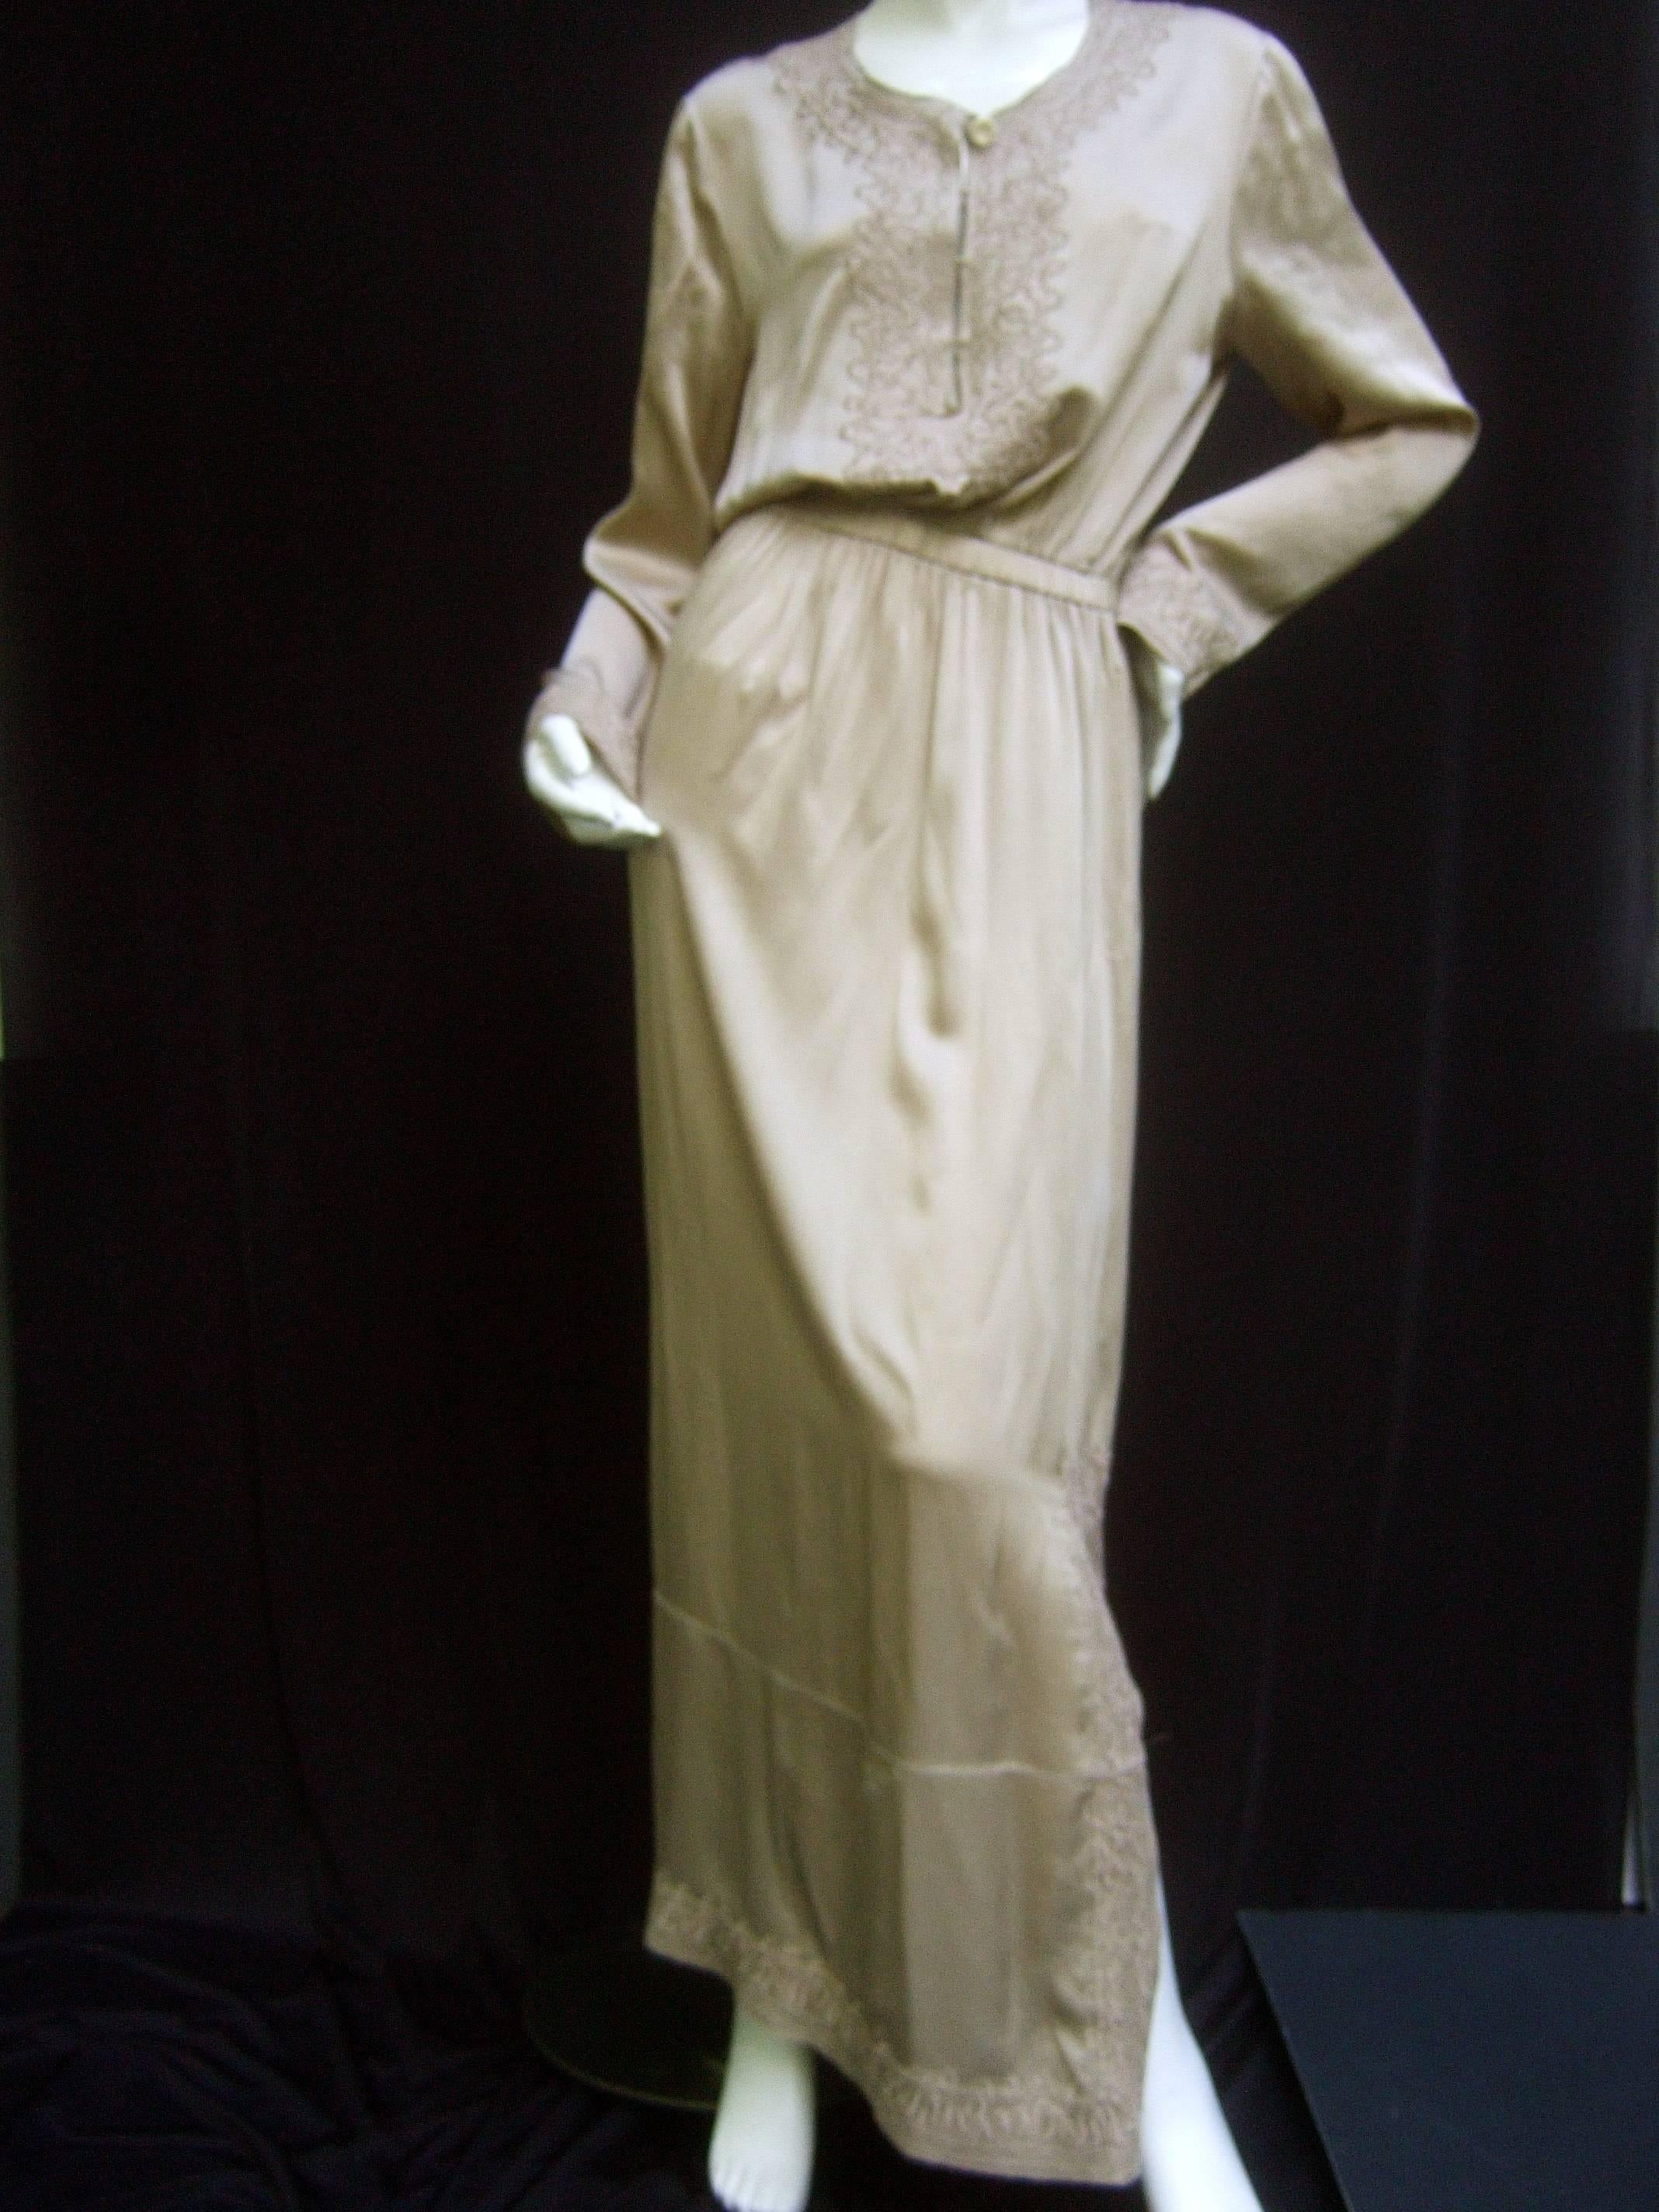 Yves Saint Laurent Rive Gauche embroidered silk gown 
The elegant champagne color gown is designed with 
sumptuous silk. Accented with subtle embroidery that 
frames the neckline, cuffs and extends to the lower sides 
and hemline

The bodice